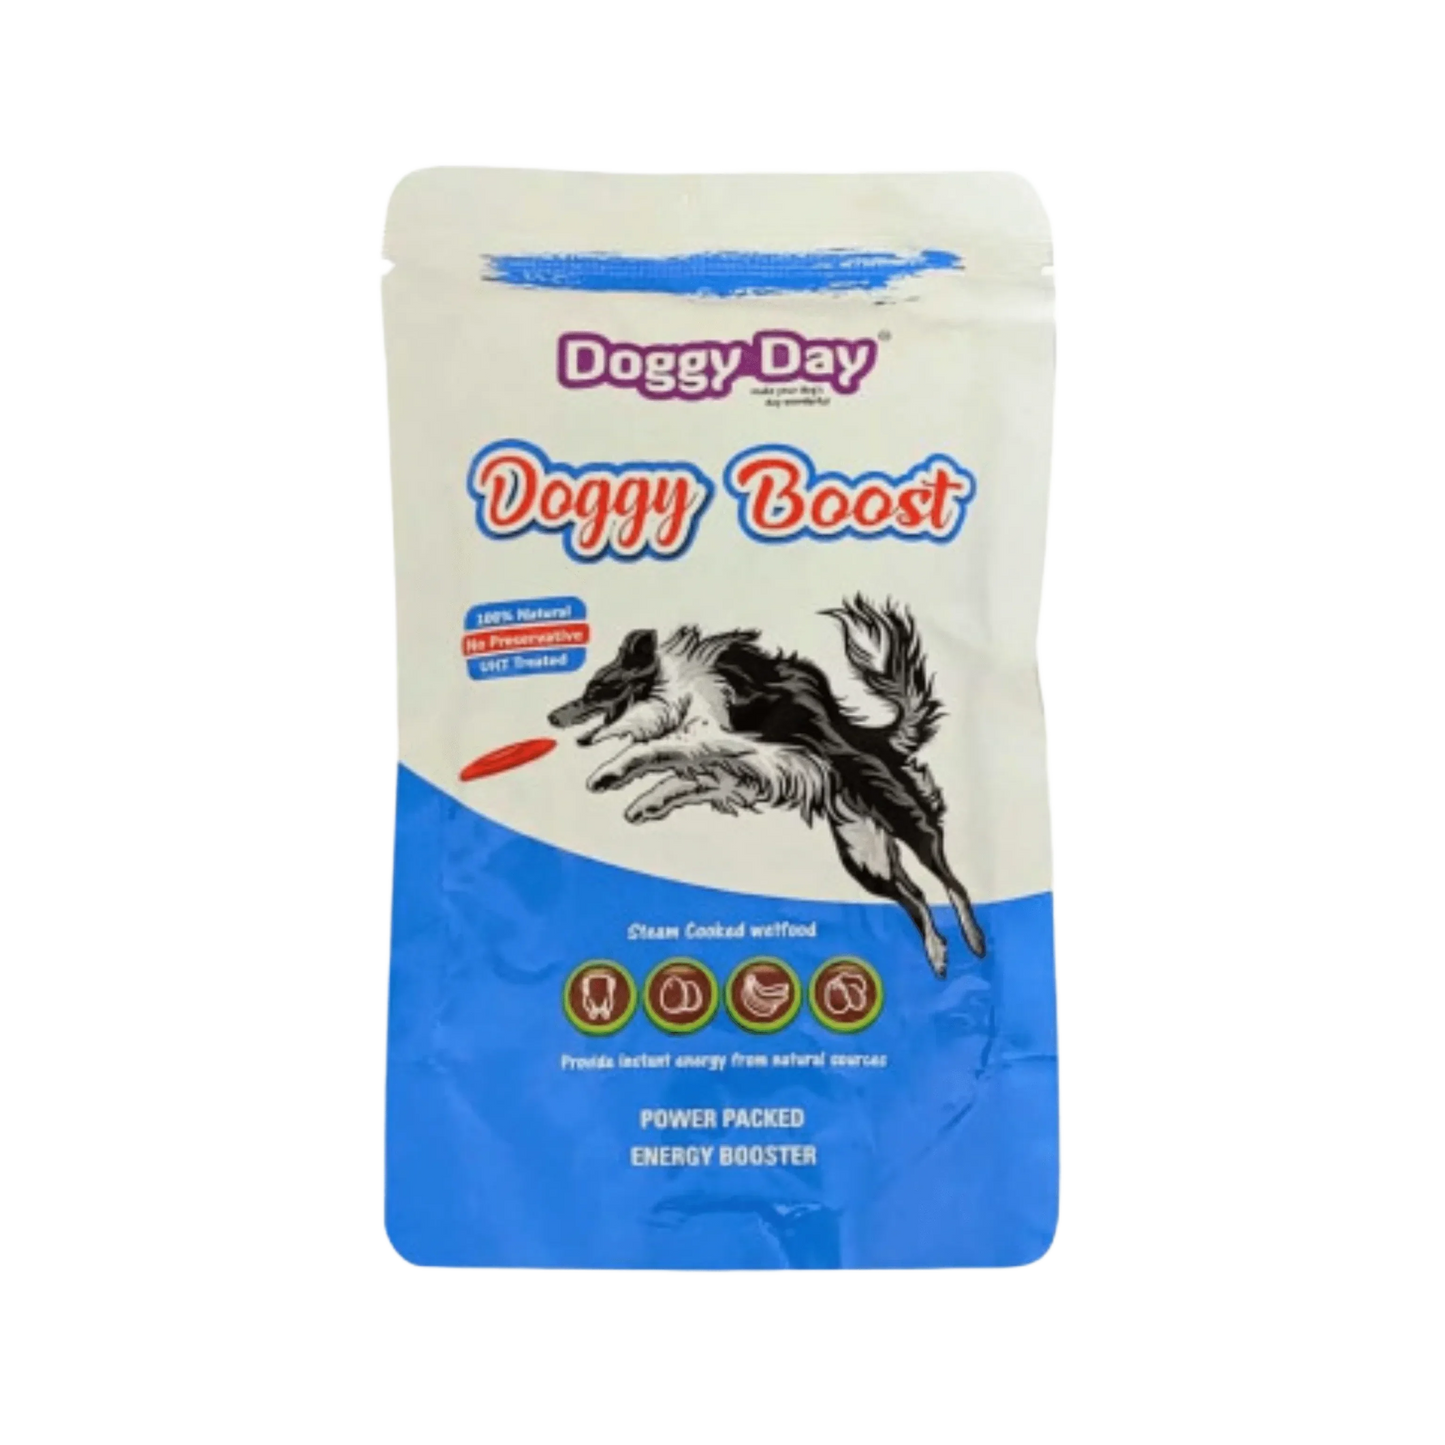 DOGGY DAY DOGGY BOOST GRAVY